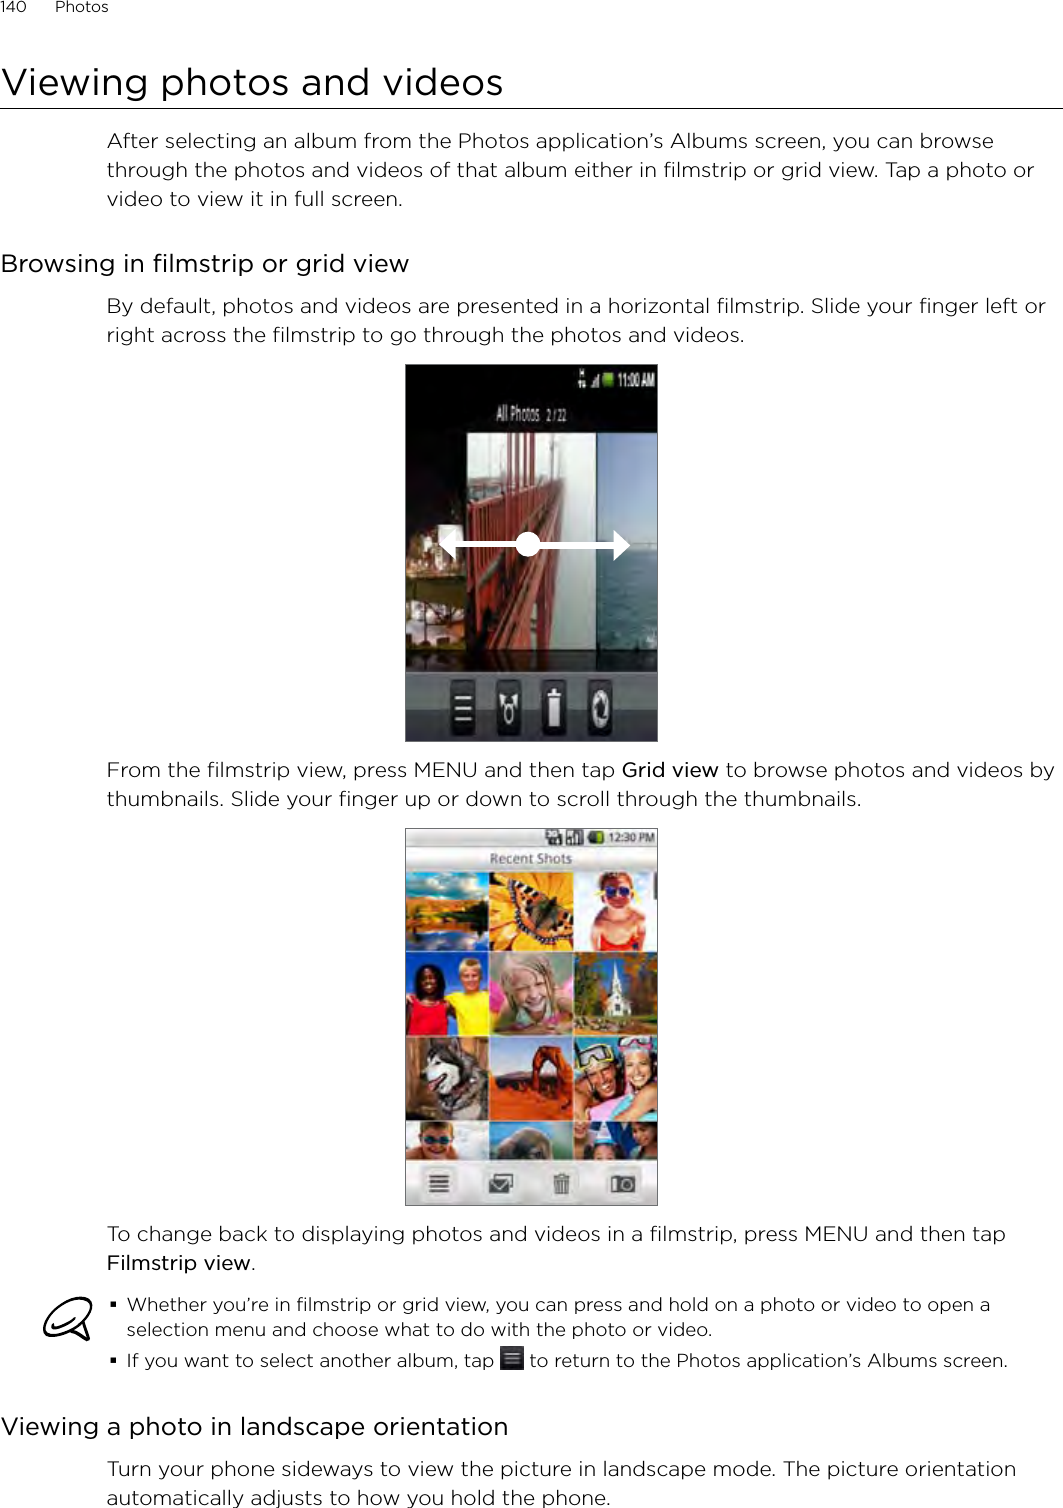 140      Photos      Viewing photos and videosAfter selecting an album from the Photos application’s Albums screen, you can browse through the photos and videos of that album either in filmstrip or grid view. Tap a photo or video to view it in full screen.Browsing in filmstrip or grid viewBy default, photos and videos are presented in a horizontal filmstrip. Slide your finger left or right across the filmstrip to go through the photos and videos.From the filmstrip view, press MENU and then tap Grid view to browse photos and videos by thumbnails. Slide your finger up or down to scroll through the thumbnails.To change back to displaying photos and videos in a filmstrip, press MENU and then tap Filmstrip view.Whether you’re in filmstrip or grid view, you can press and hold on a photo or video to open a selection menu and choose what to do with the photo or video.If you want to select another album, tap   to return to the Photos application’s Albums screen.Viewing a photo in landscape orientationTurn your phone sideways to view the picture in landscape mode. The picture orientation automatically adjusts to how you hold the phone.